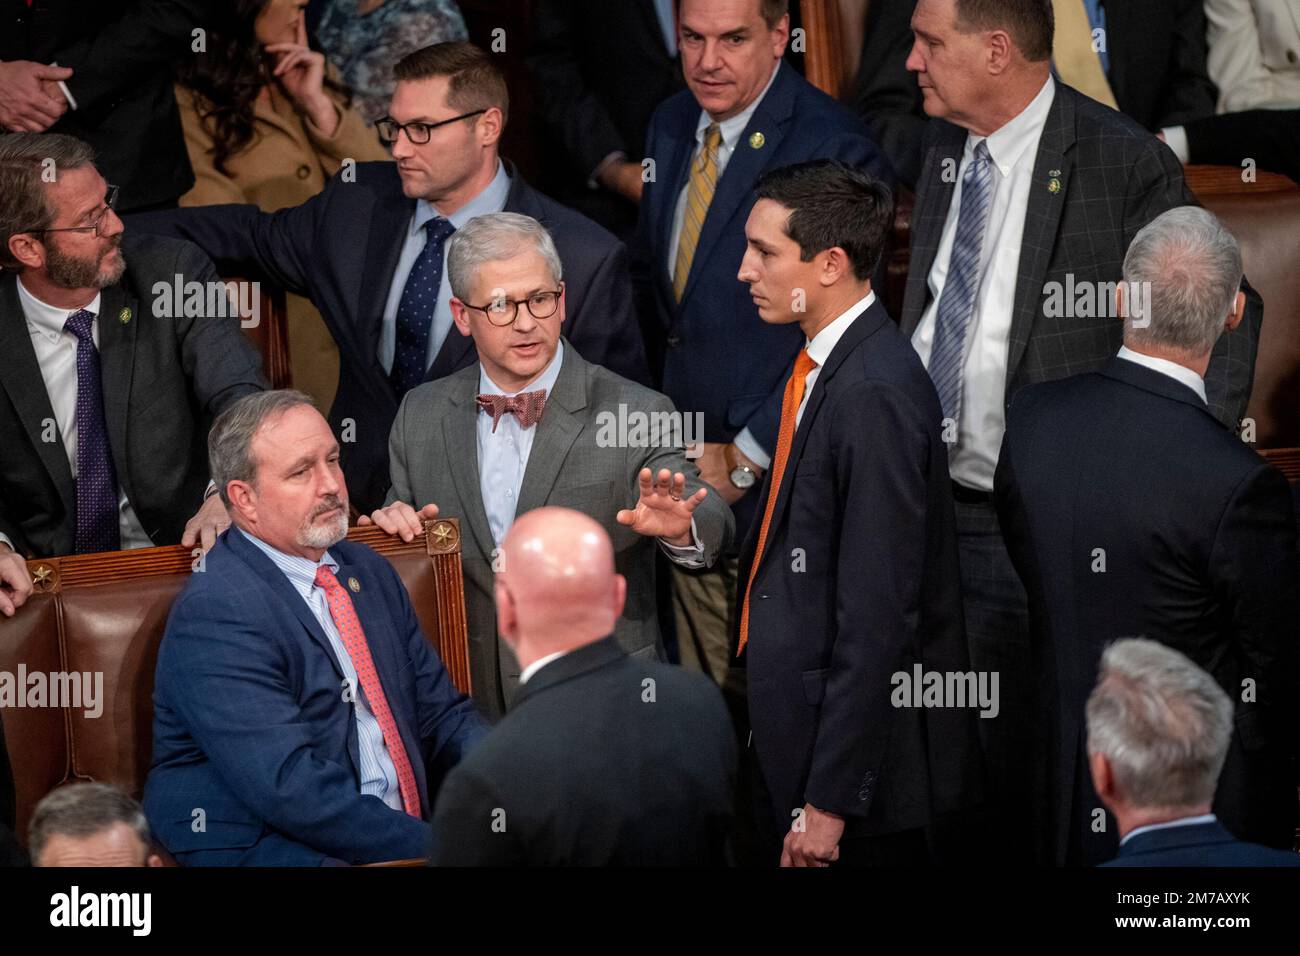 United States Representative Patrick McHenry (Republican of North Carolina) tries to calm down the tension following a verbal confrontation between United States Representative Matt Gaetz (Republican of Florida), who voted 'present,” and US House Republican Leader Kevin McCarthy (Republican of California), after Mr. McCarthy failed to get the votes he needed for the Speakership, on the 14th vote attempt, at the US Capitol, in Washington, DC, USA, Saturday, January 7, 2023. Photo by Rod Lamkey/CNP/ABACAPRESS.COM Stock Photo